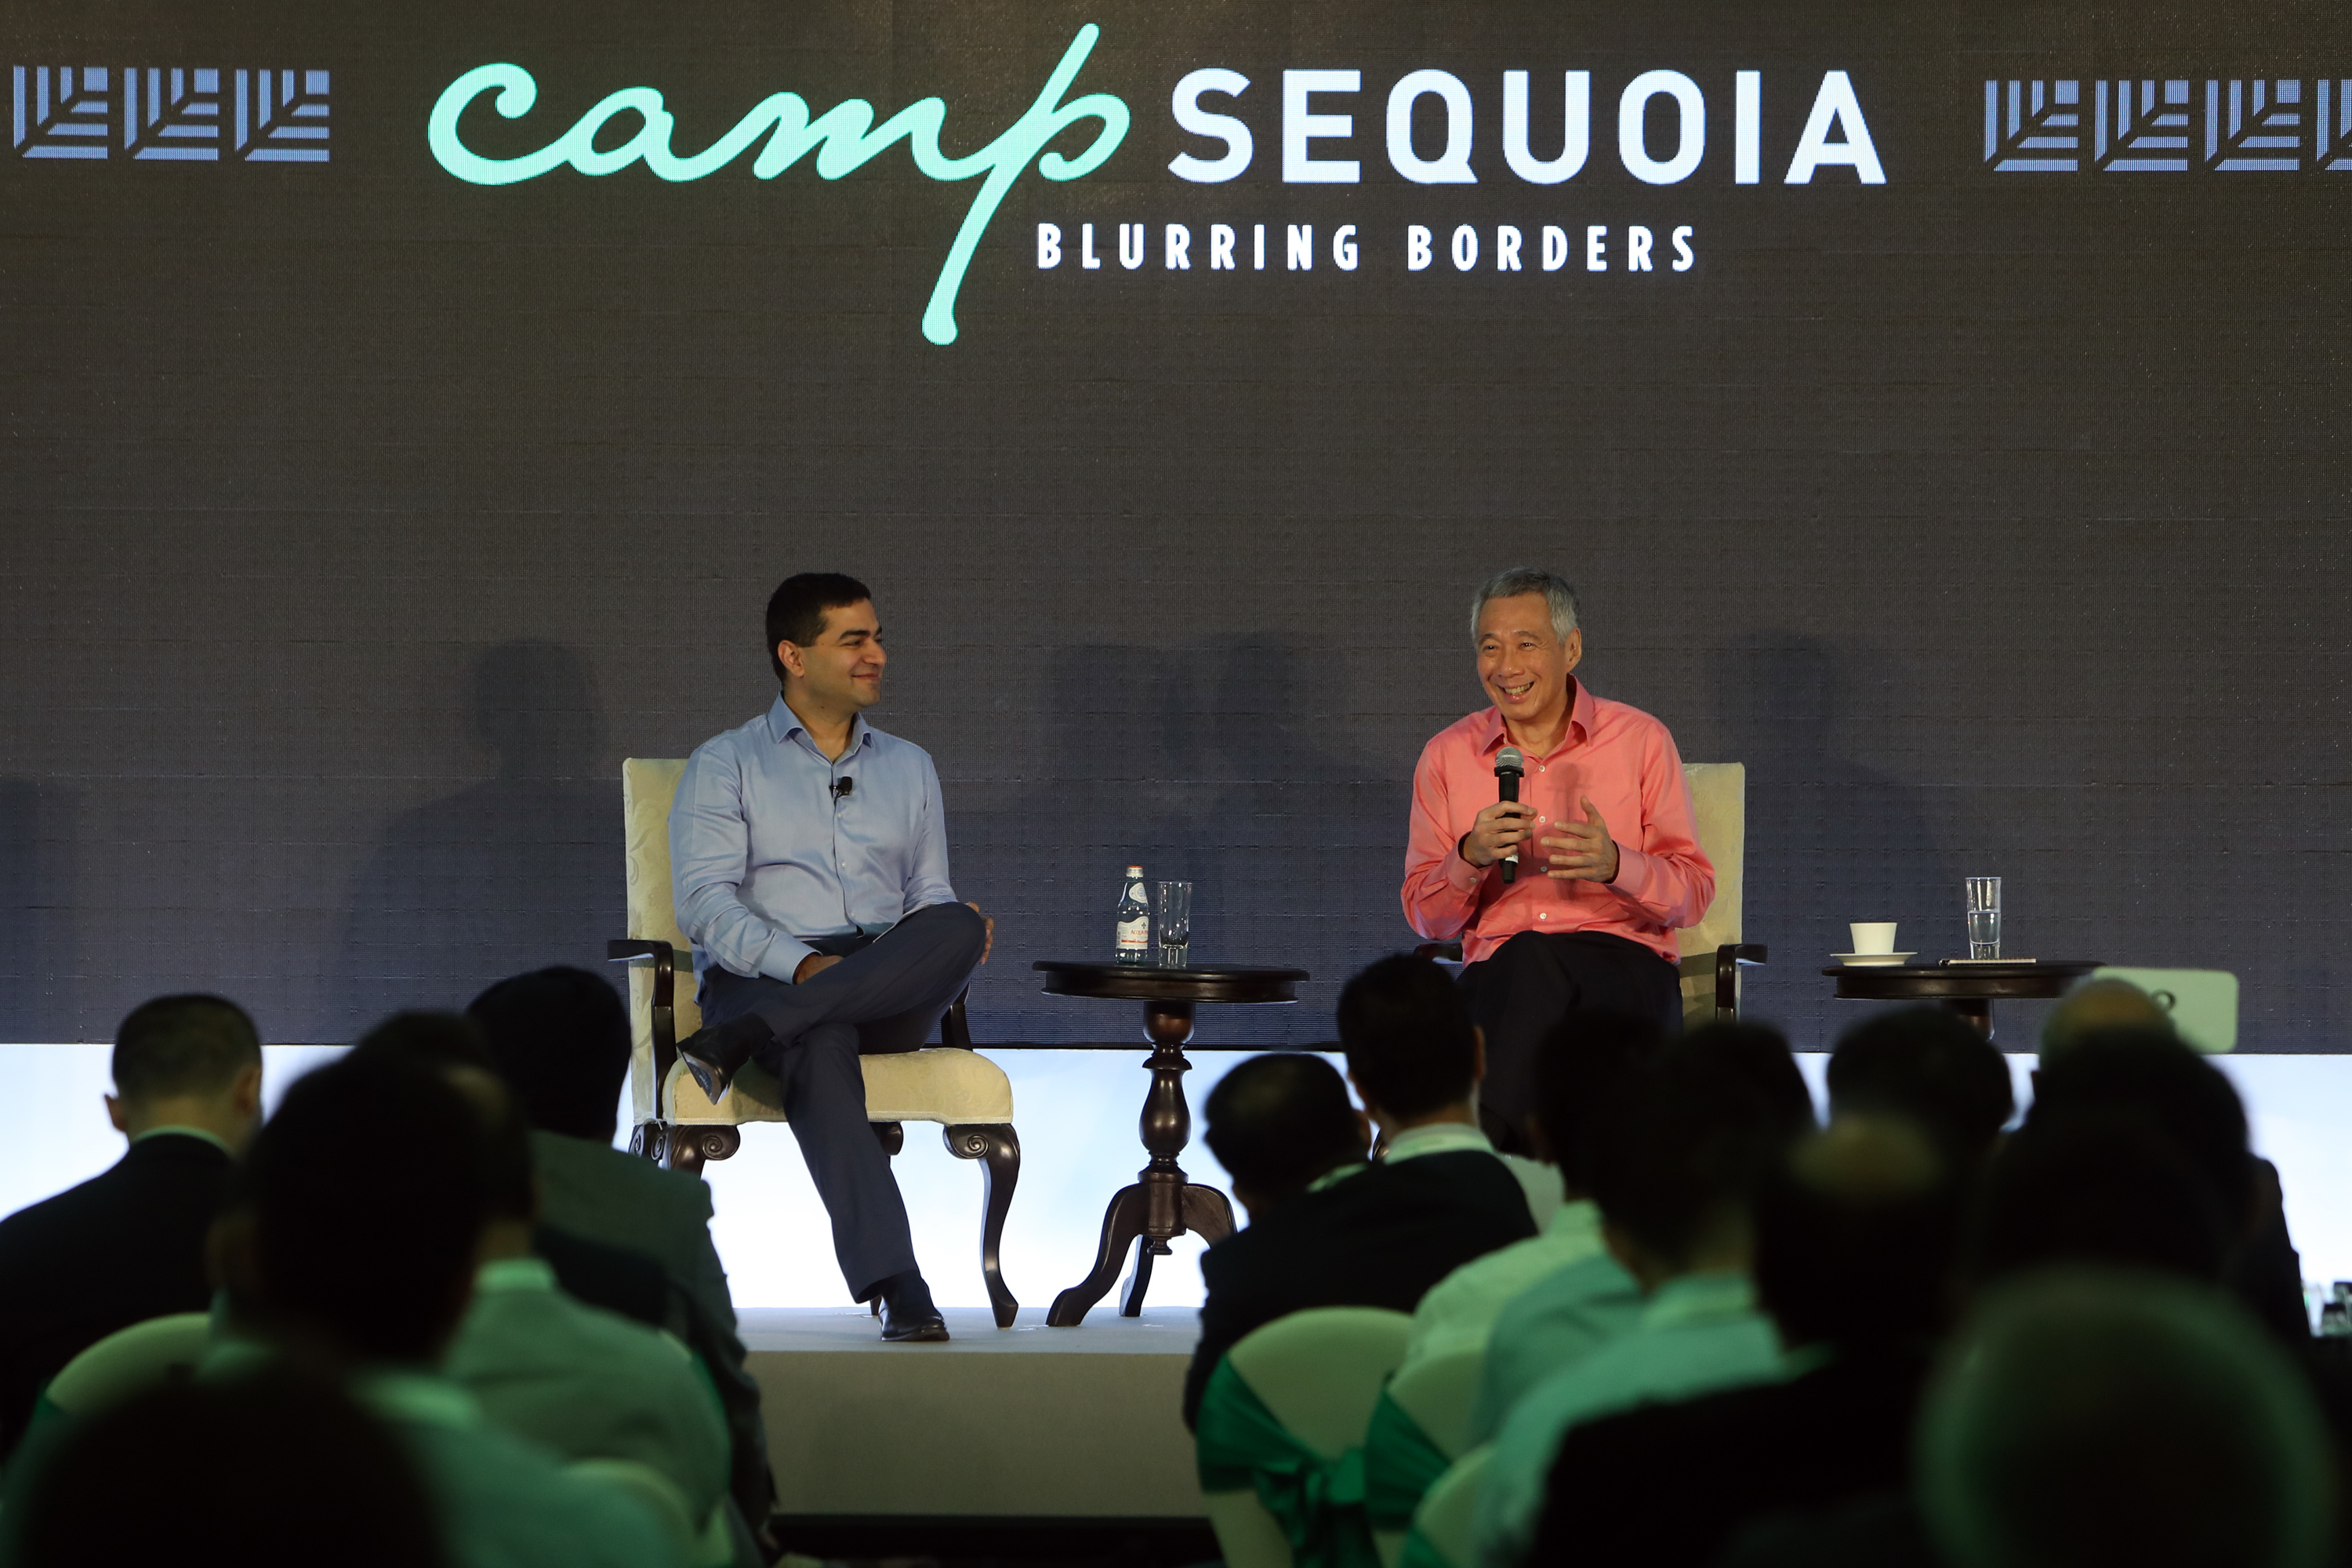 Dialogue with PM Lee Hsien Loong at Camp Sequoia on 24 February 2017 